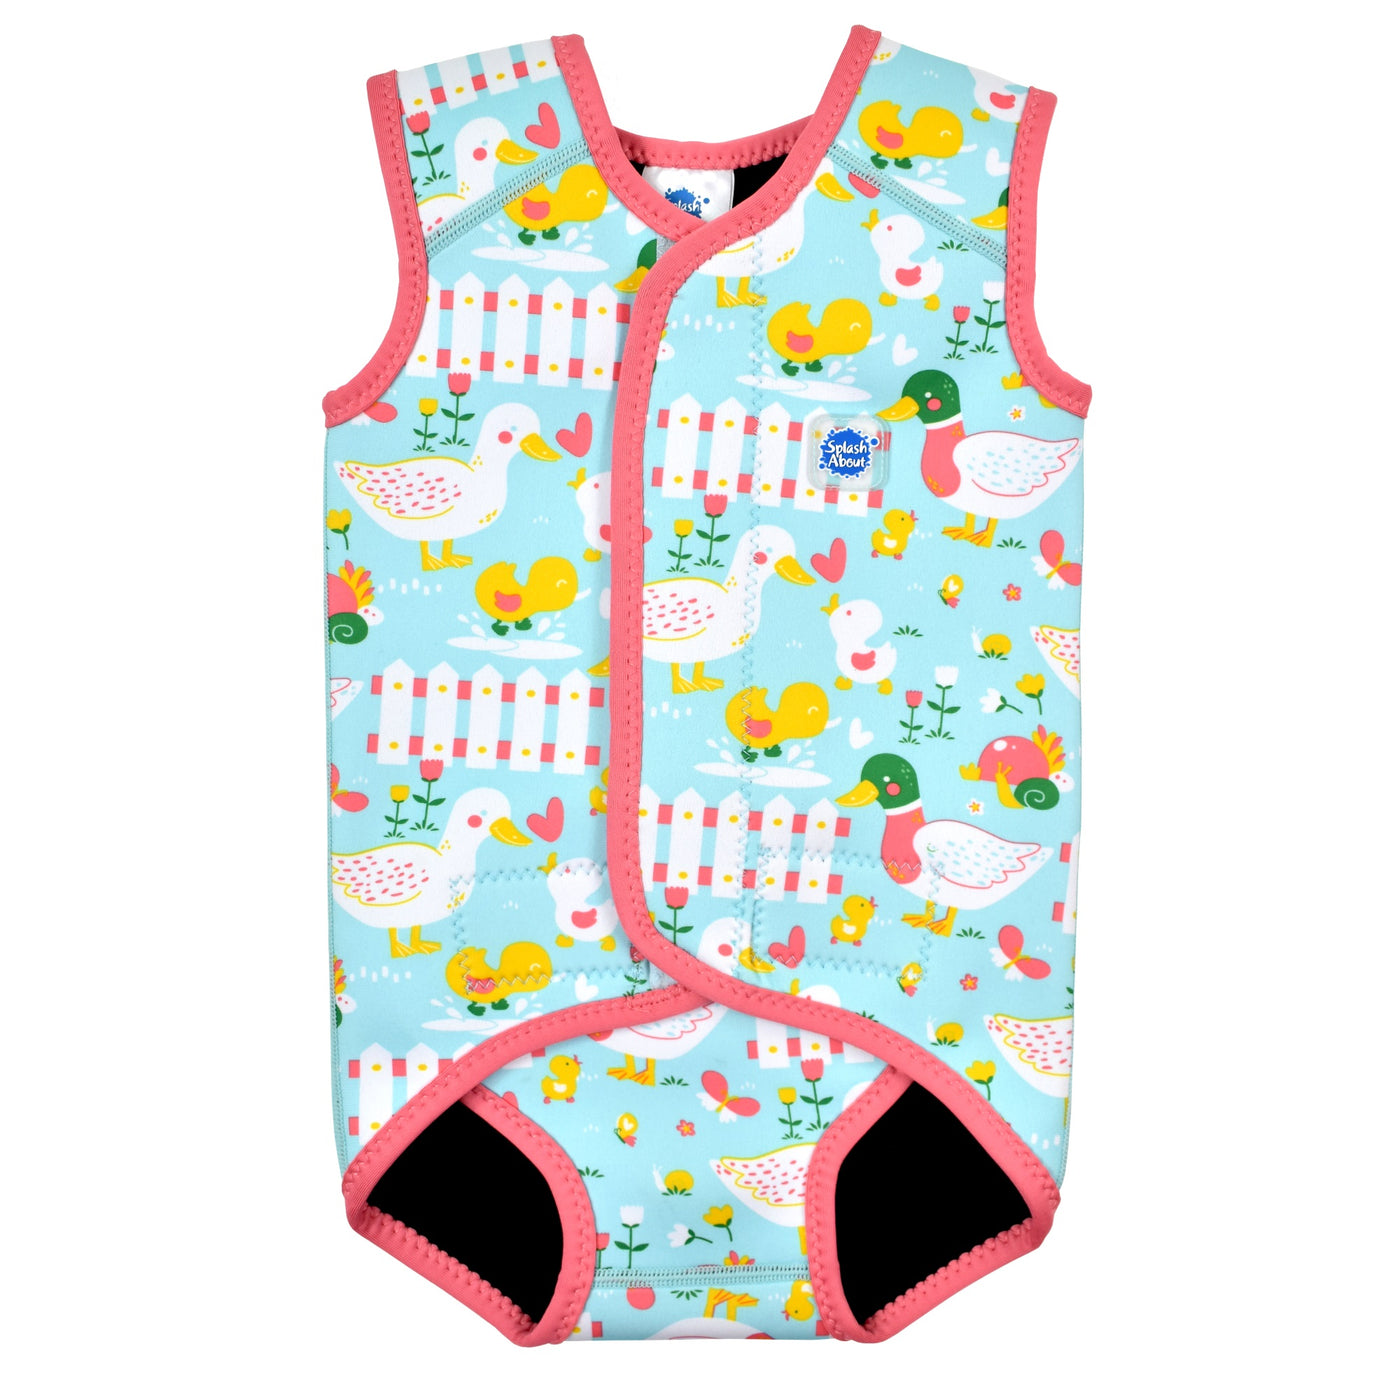 Neoprene baby swim wrap in pink and blue duck print front